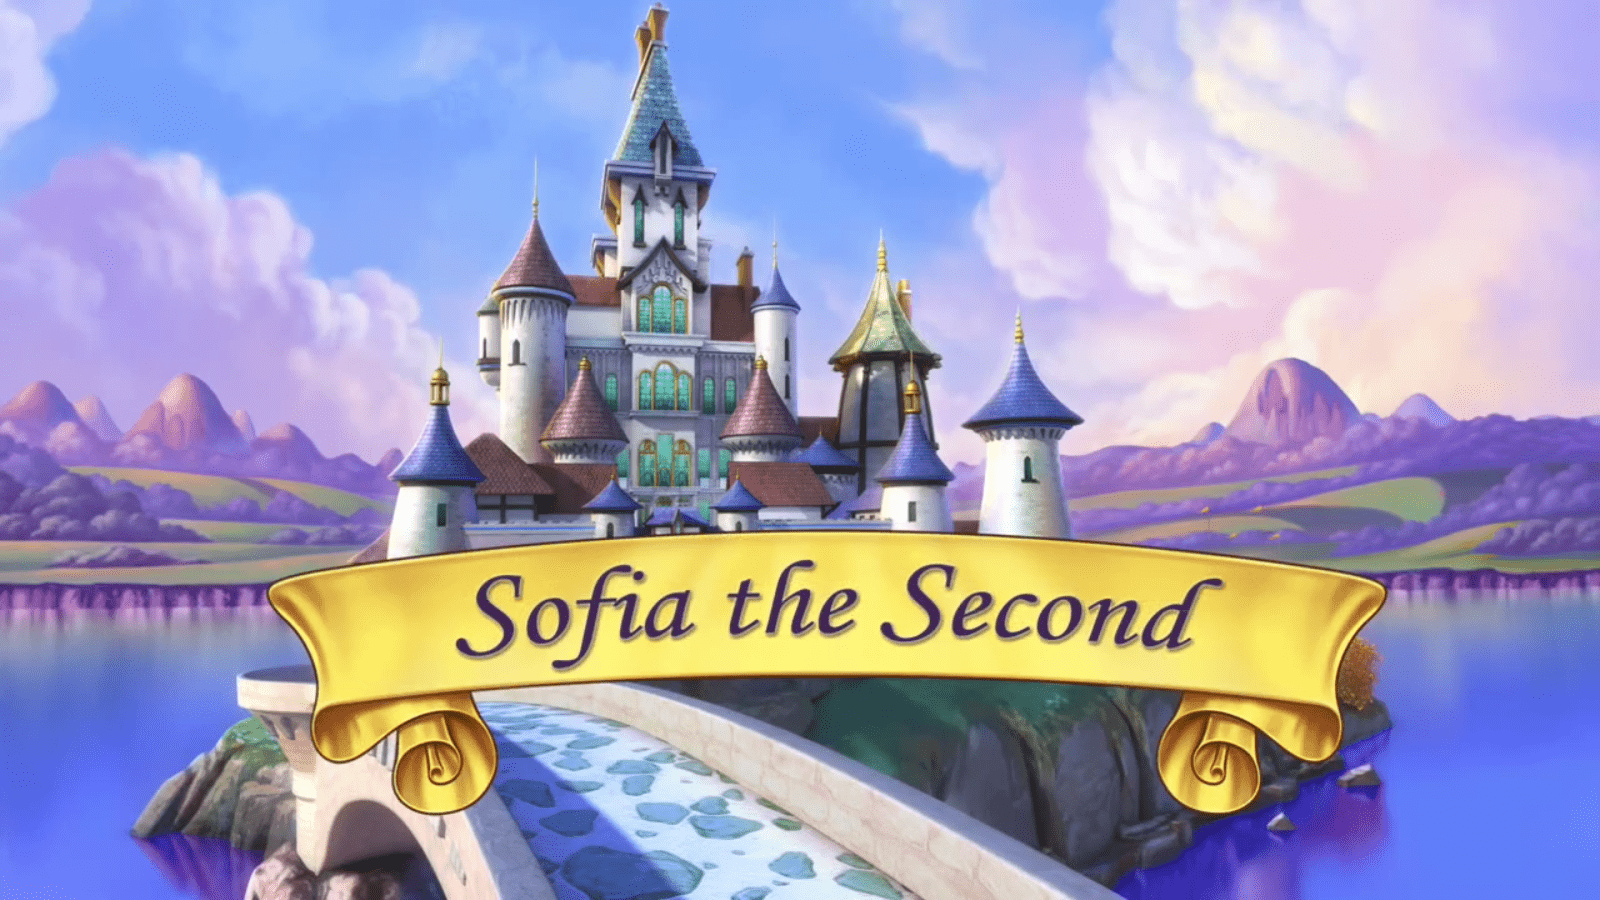 Sofia the First 12 Placemat Set : Amazon.sg: Baby Products